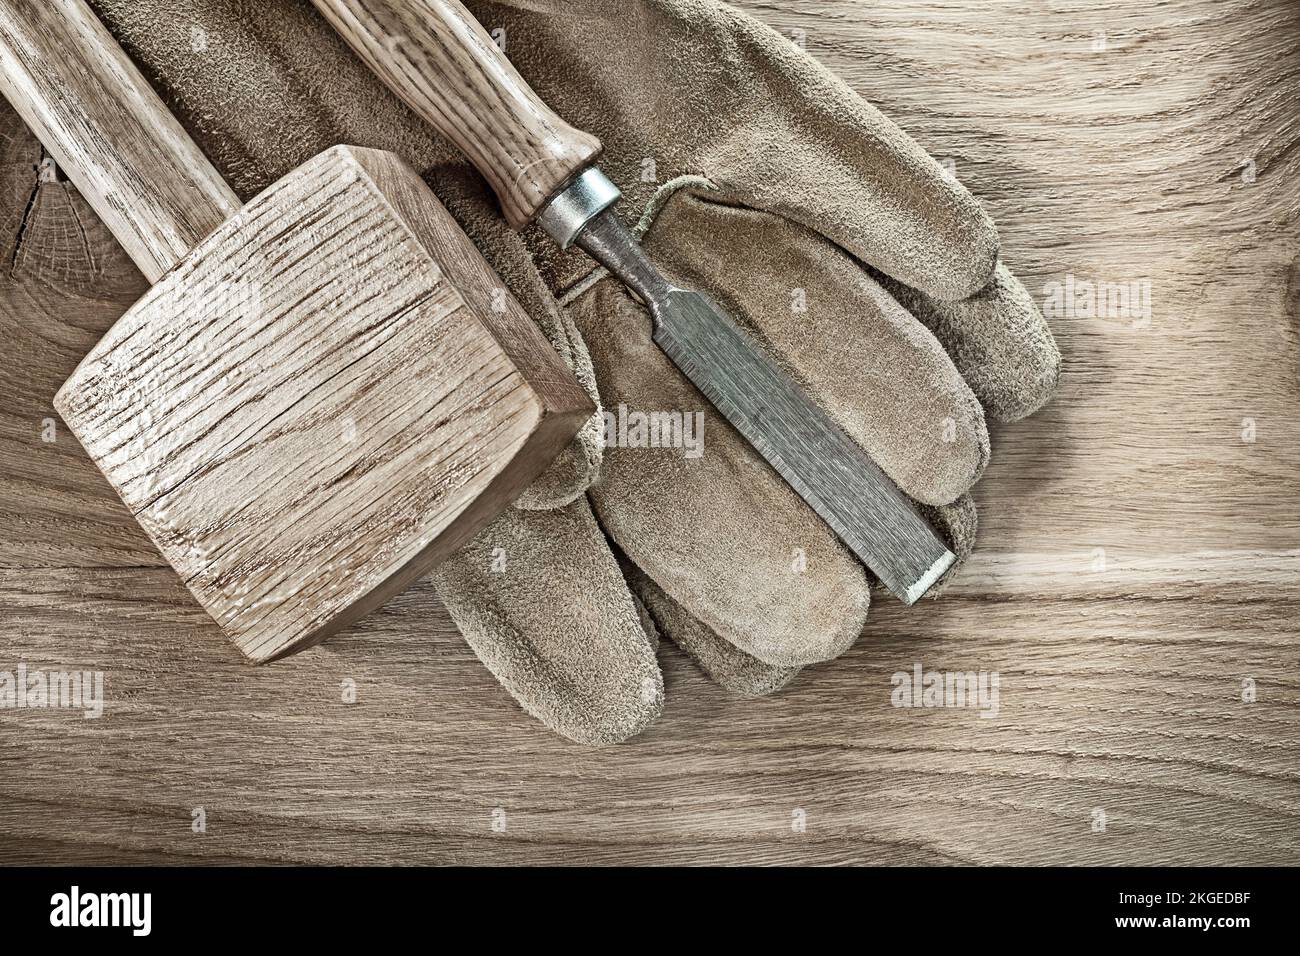 Lump hammer chisel leather protective gloves on wood board. Stock Photo